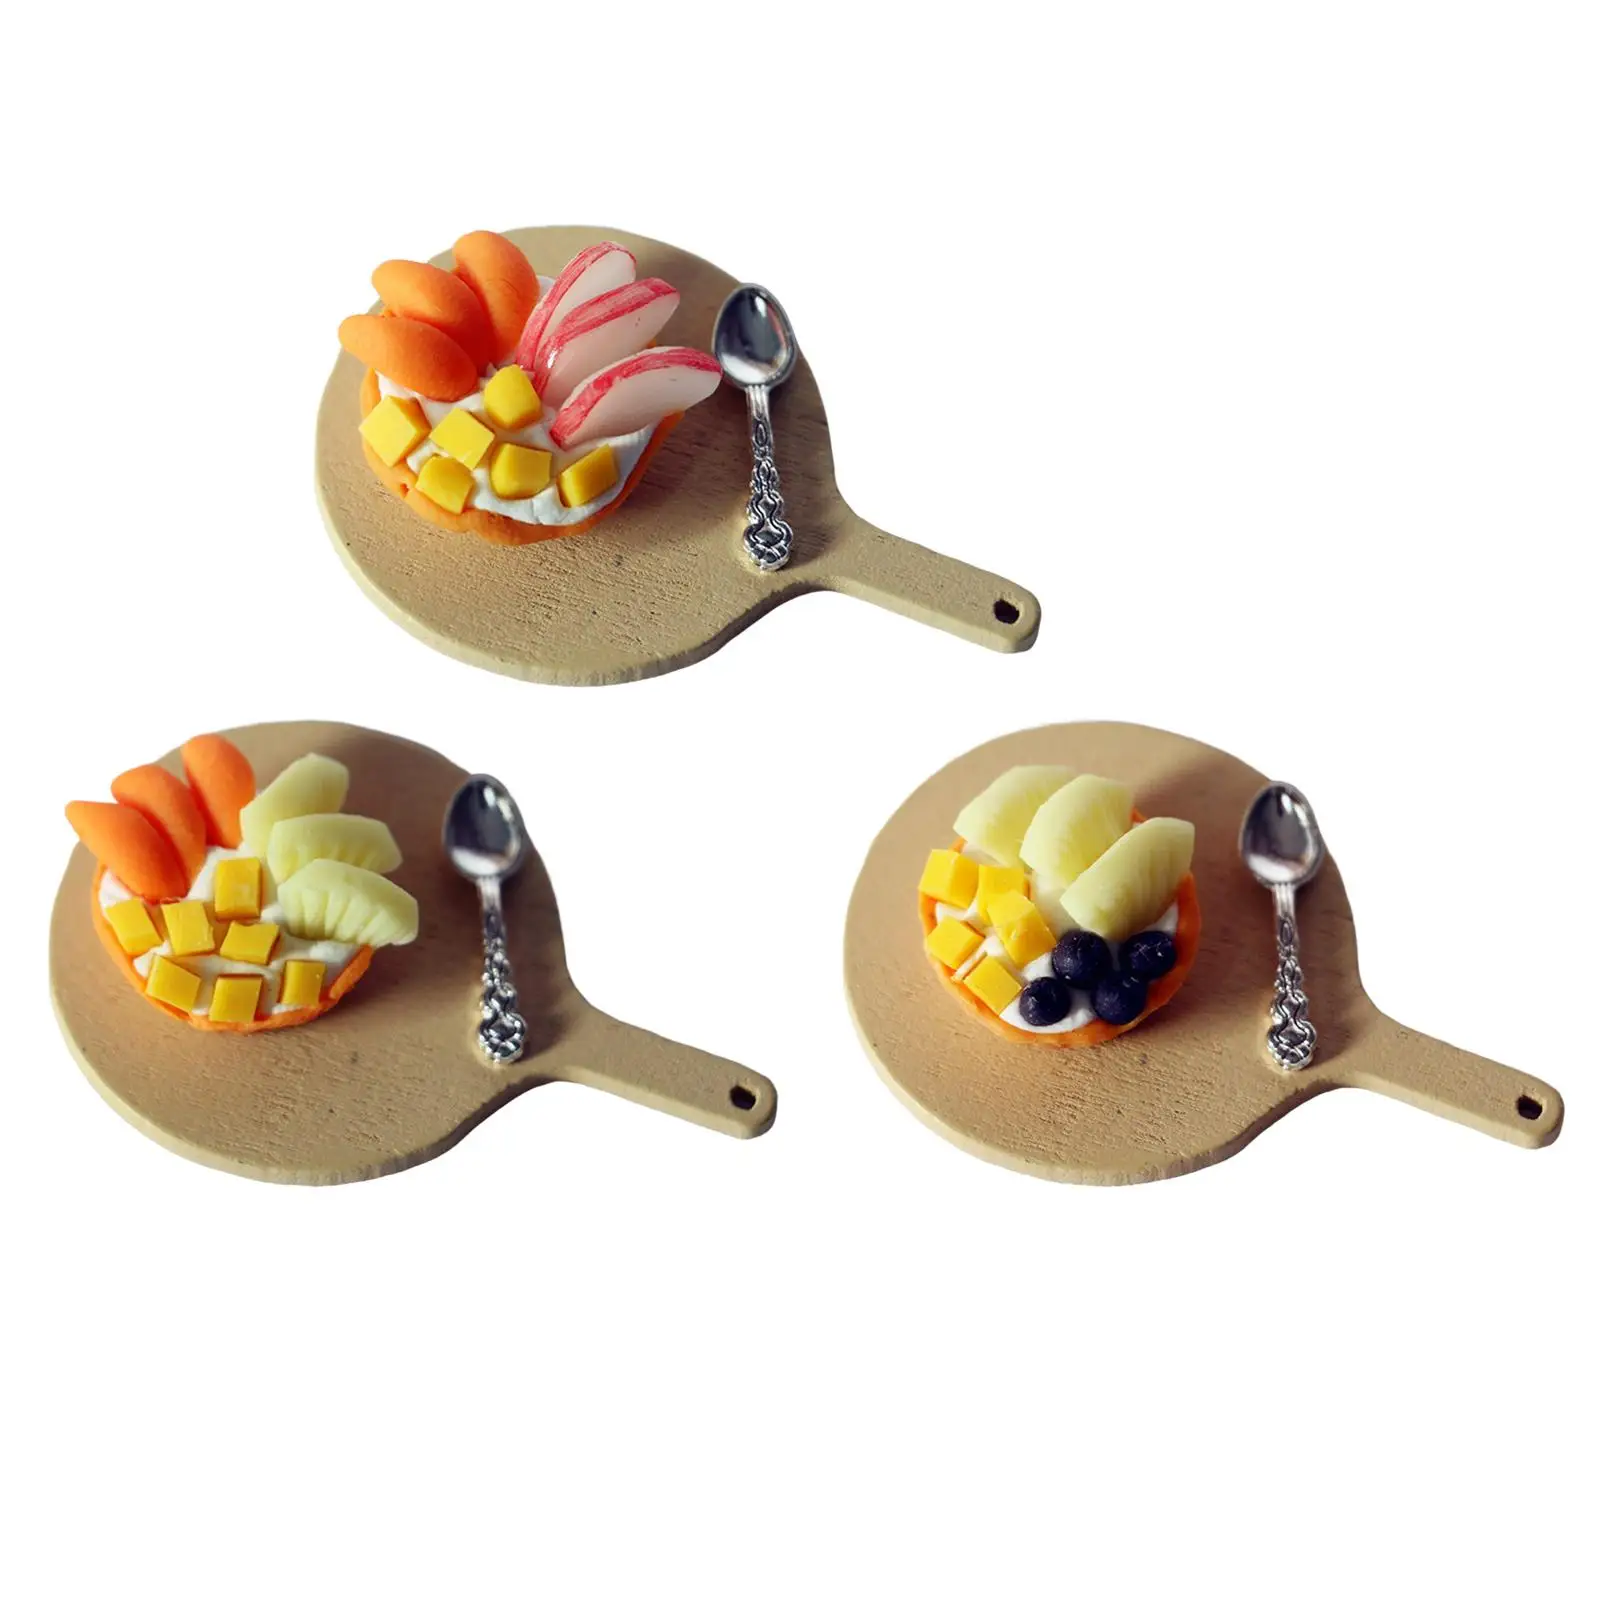 

Mini 1:12 Dollhouse Food Set Handcrafted Kitchen Accessories Spoon Assorted Fruit Pie for Toddlers Pretend Play Diorama Kids